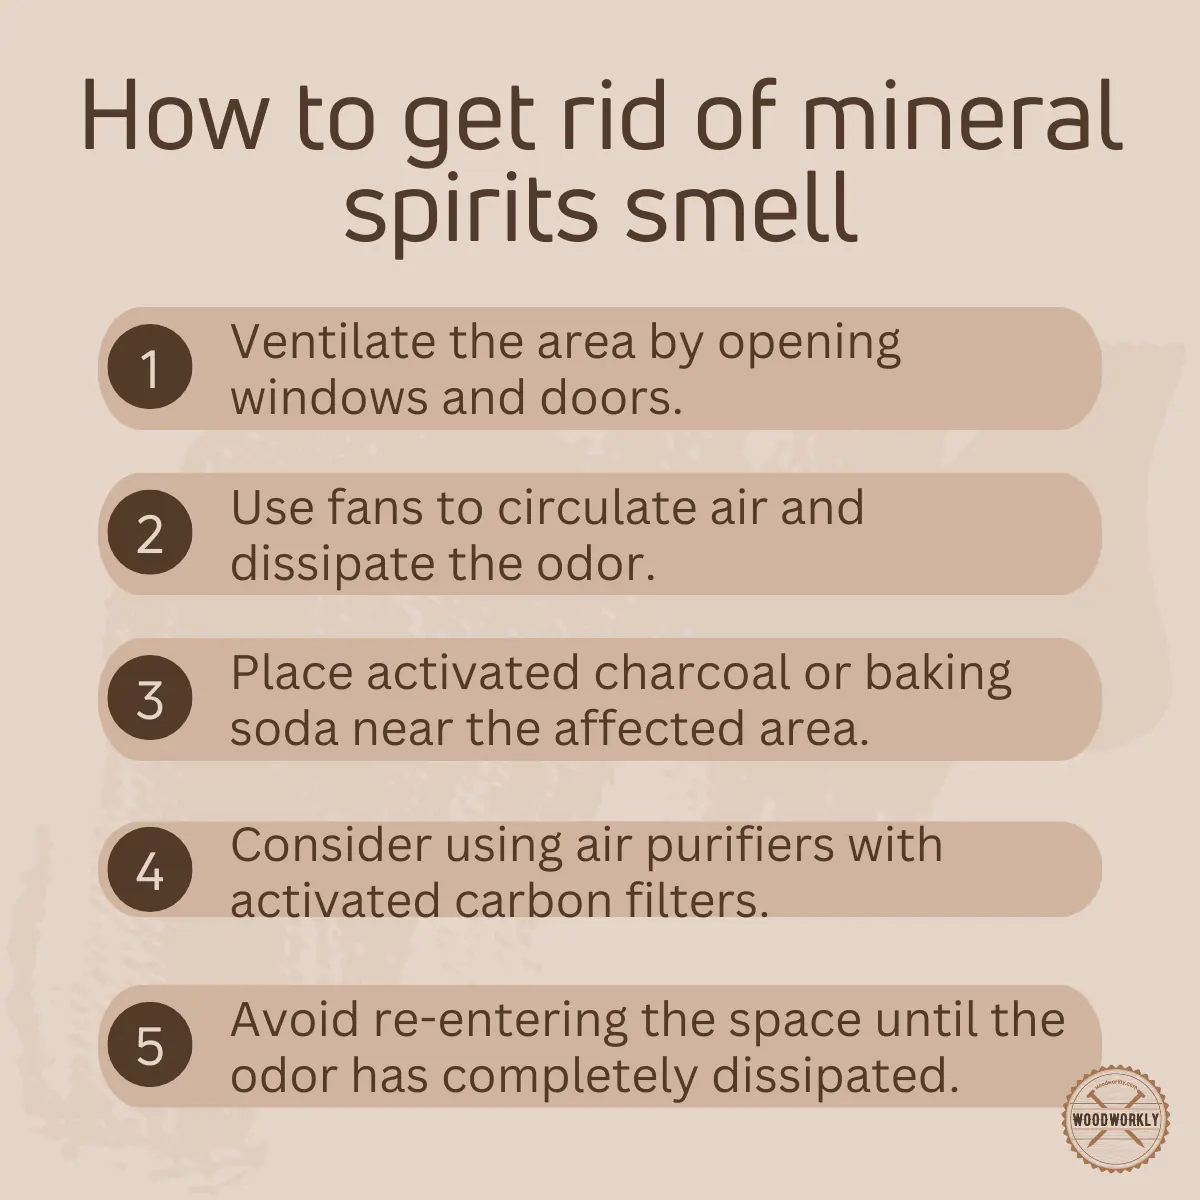 How to get rid of mineral spirits smell